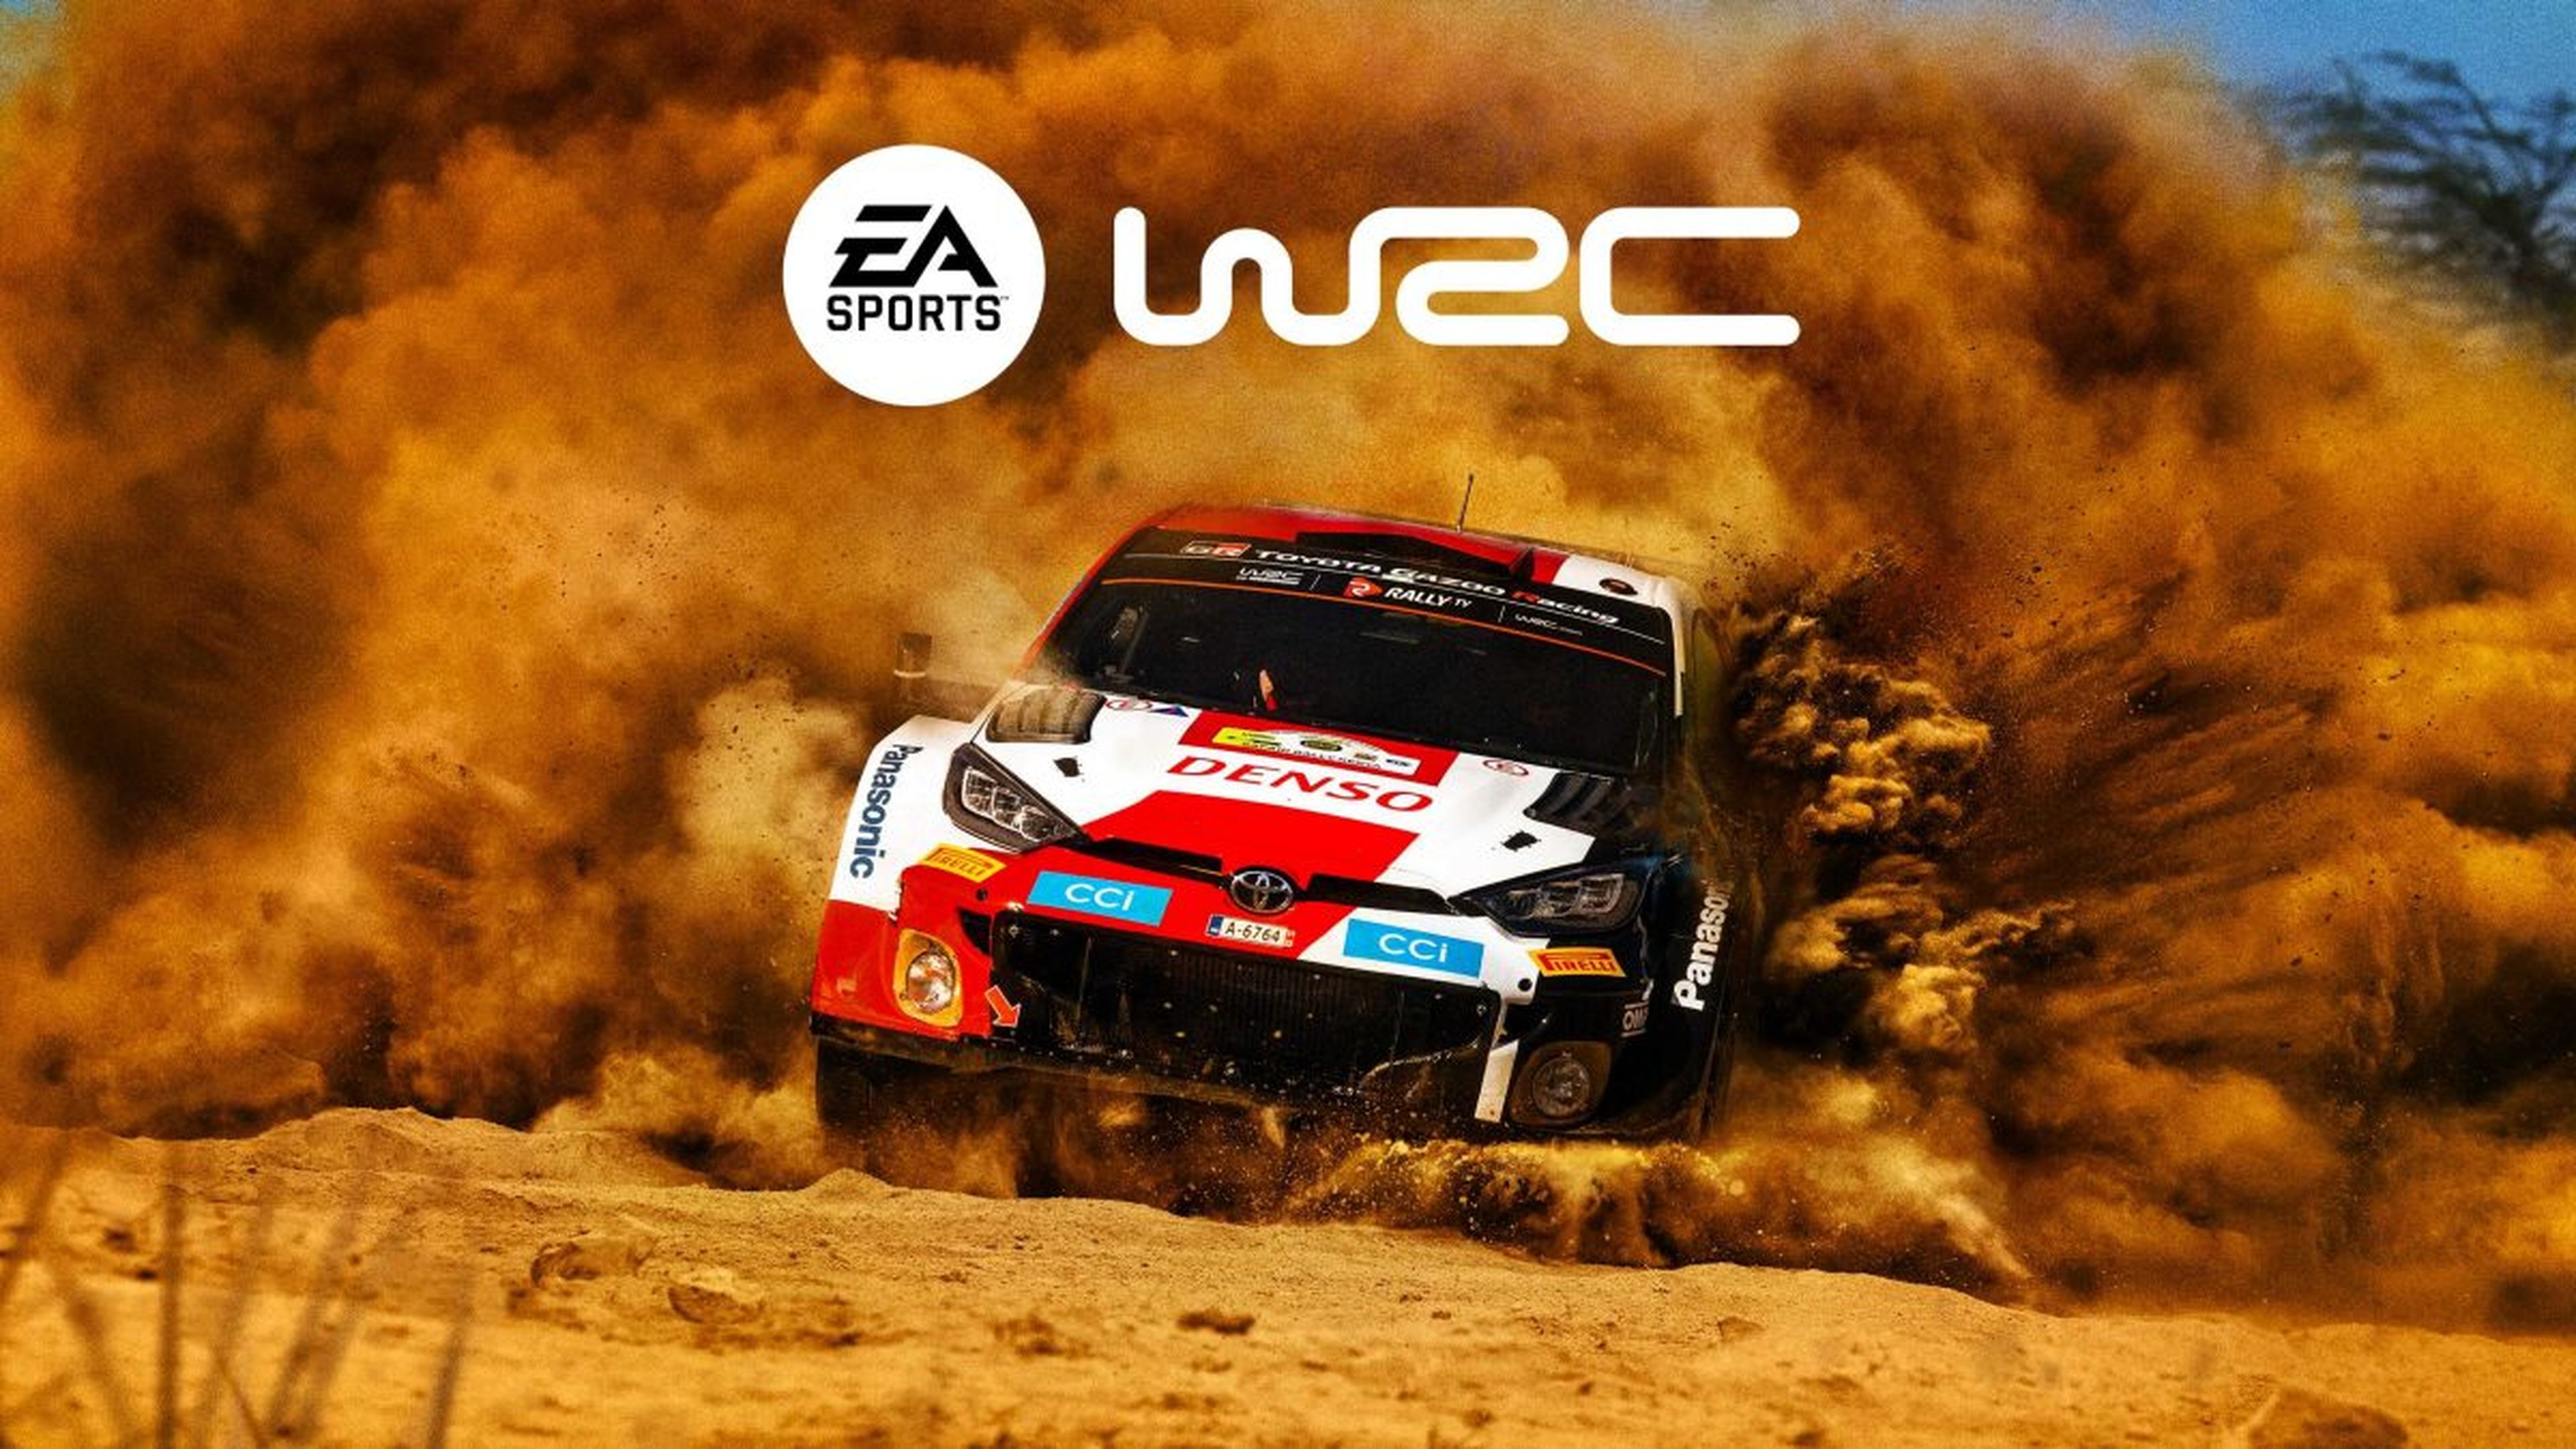 Codemasters elaborates on their decision to use Unreal Engine 5 instead of Frostbite for EA WRC